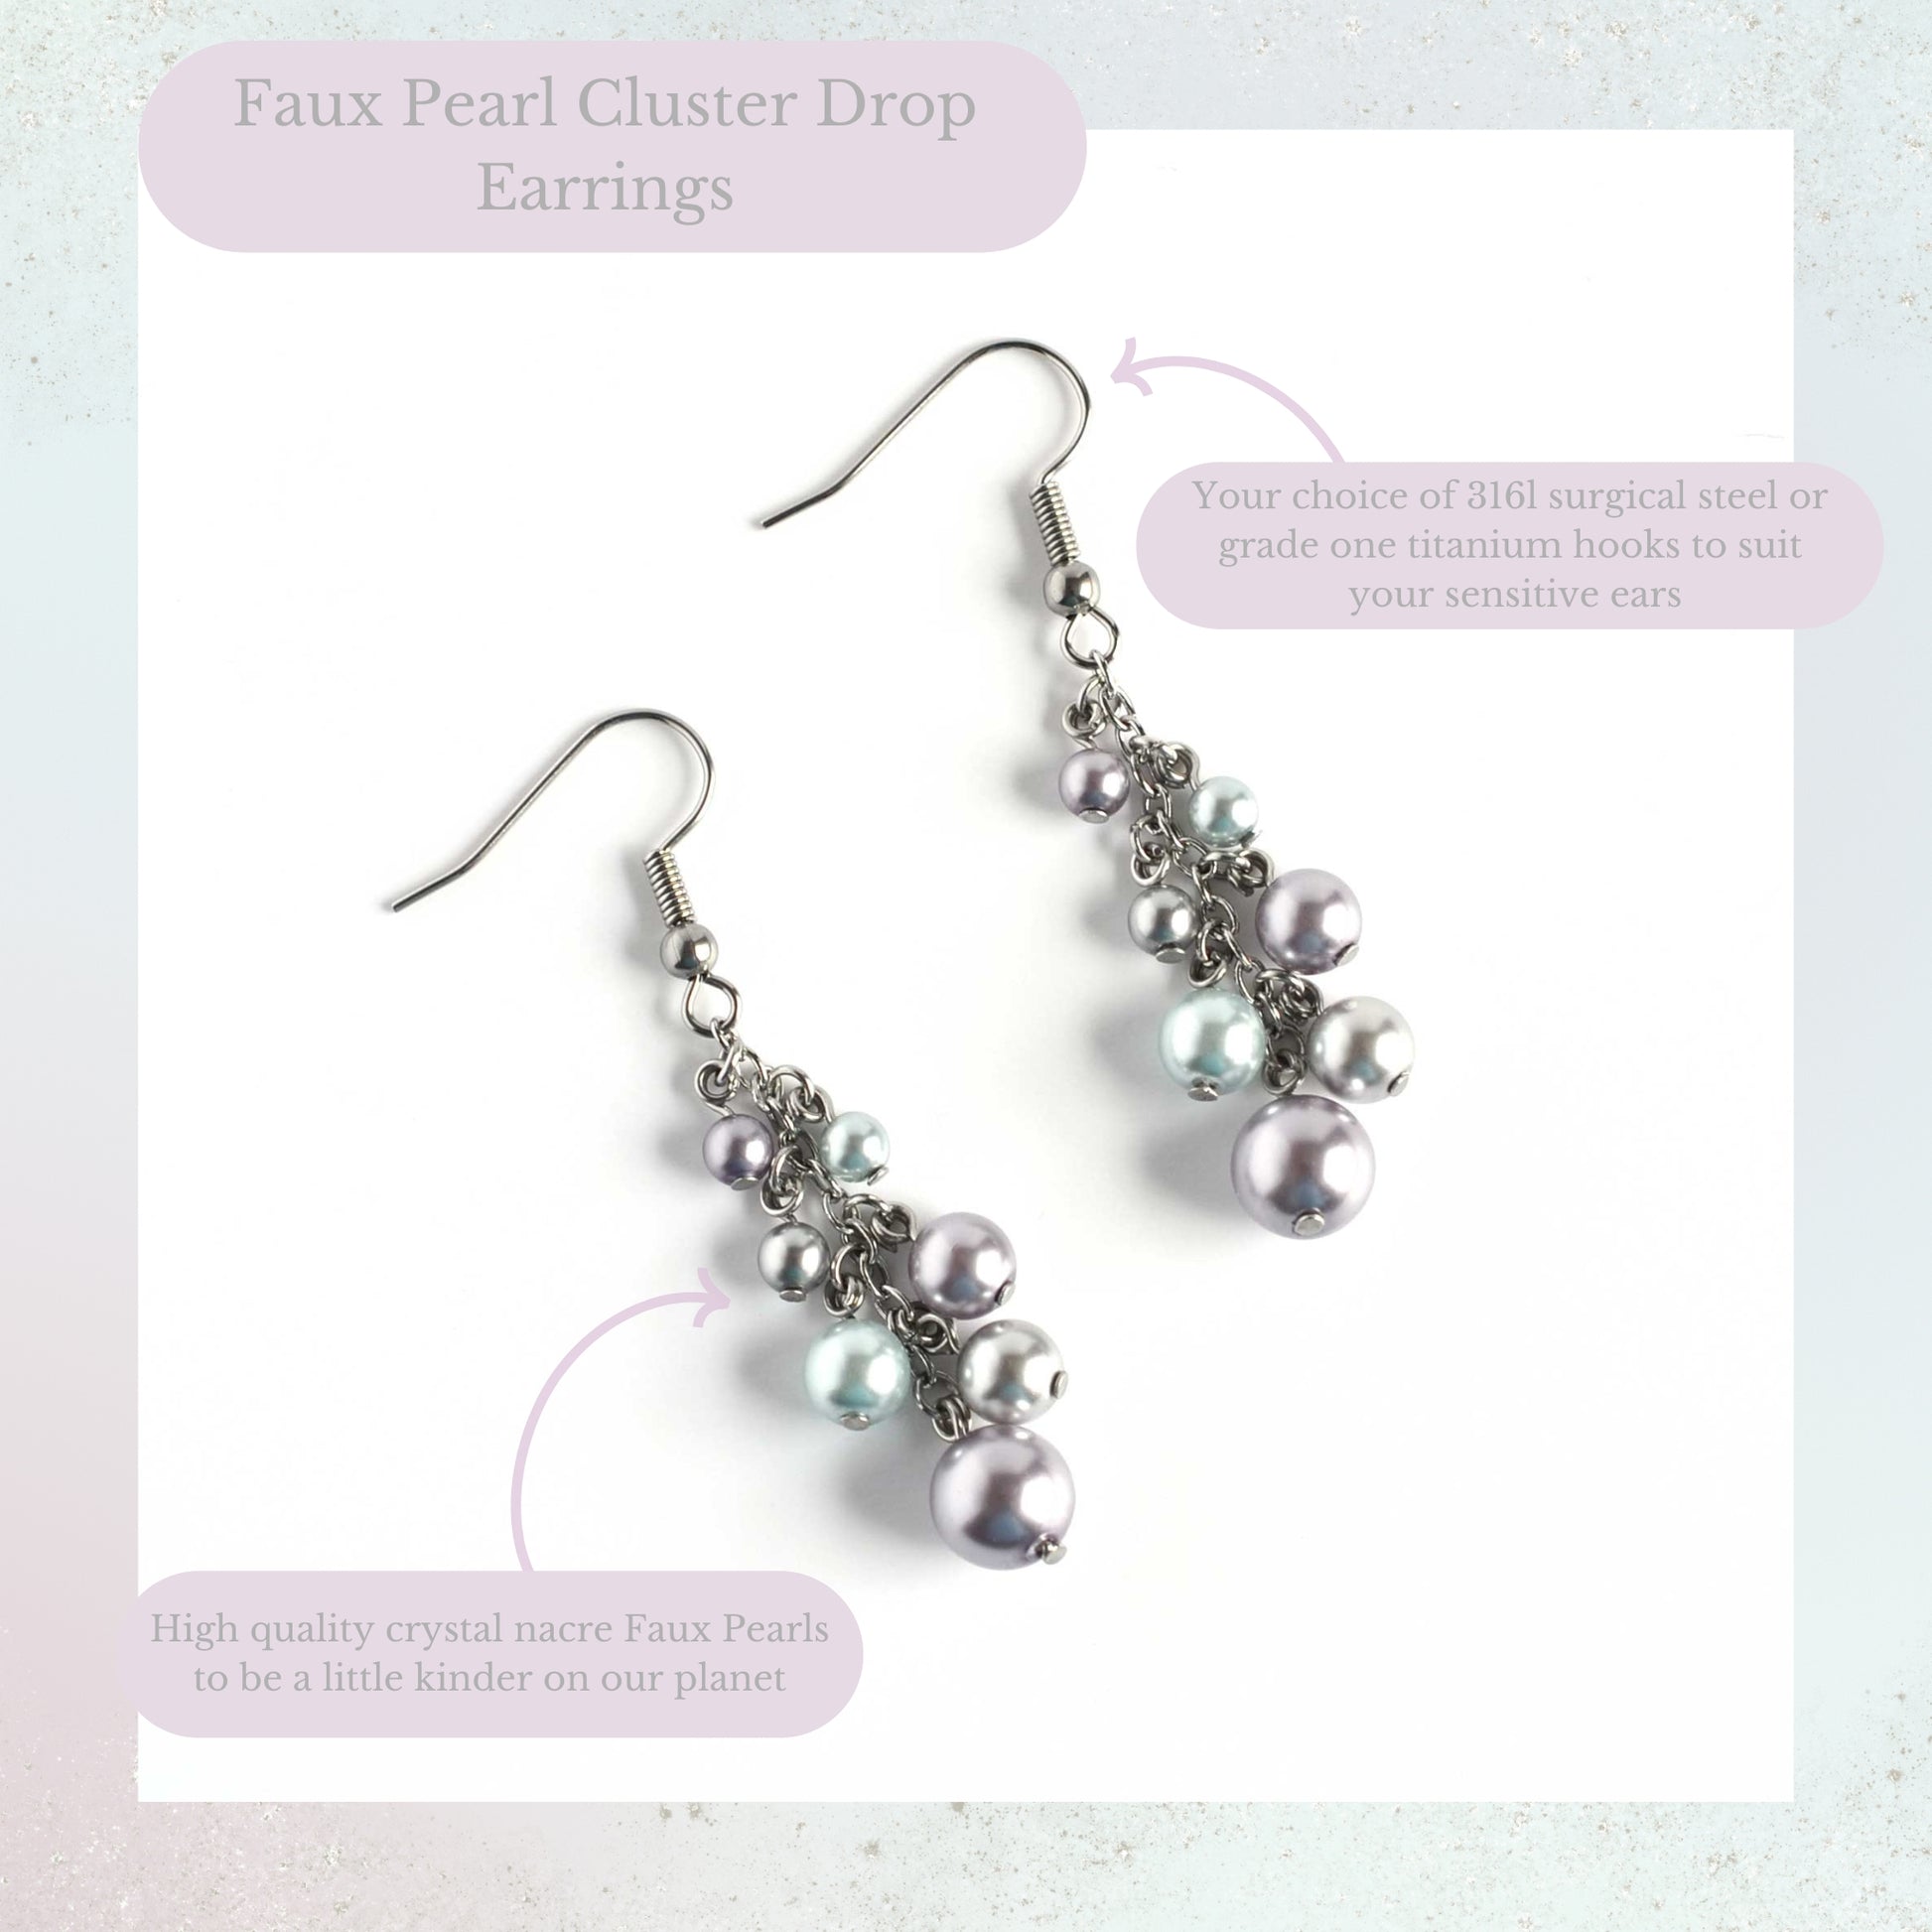 Faux pearl cluster drop earrings product information graphic